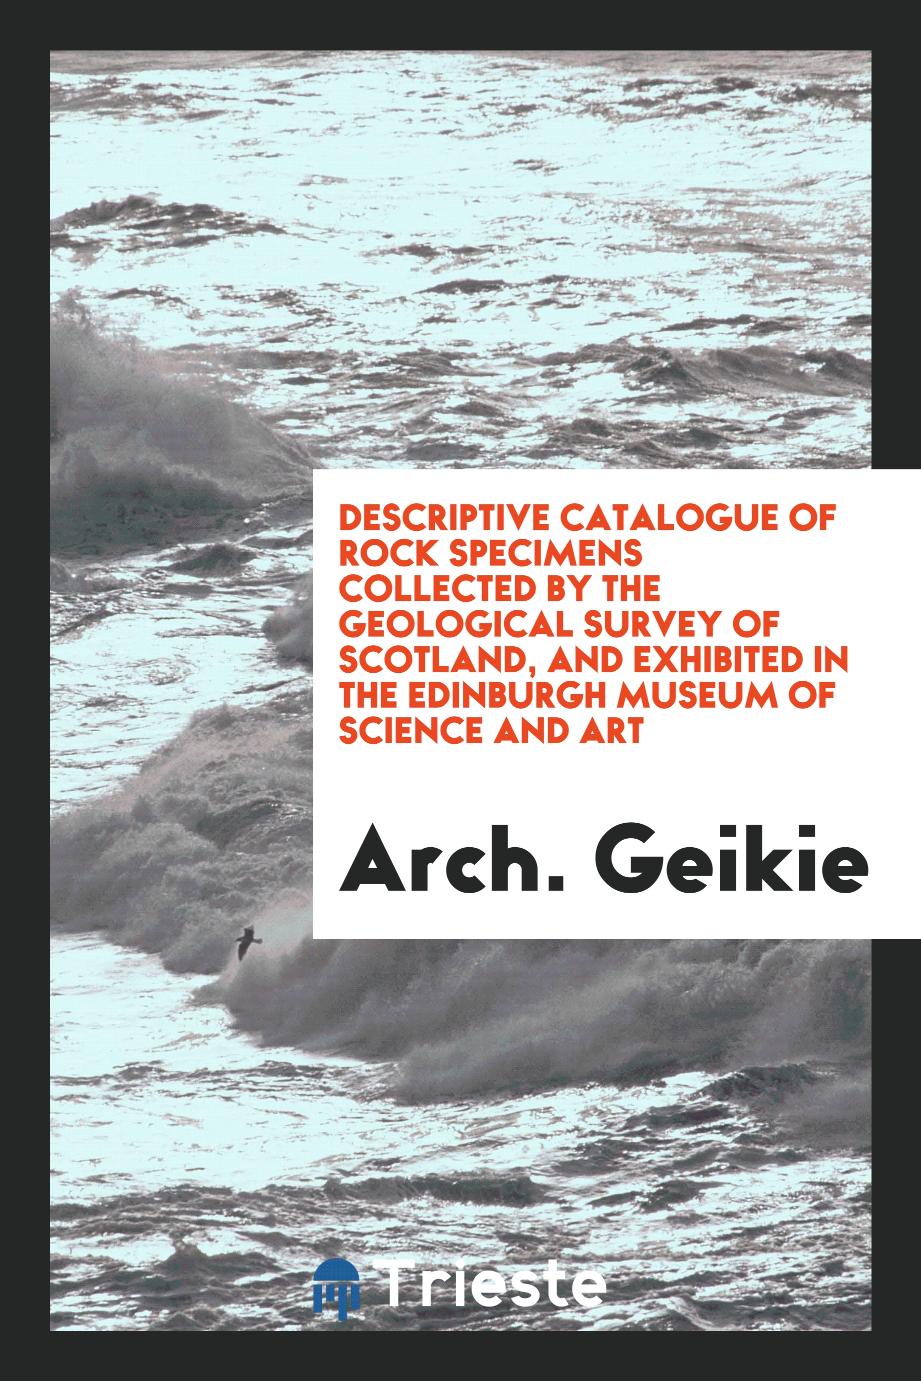 Descriptive Catalogue of Rock Specimens Collected by the Geological Survey of Scotland, and Exhibited in the Edinburgh Museum of Science and Art